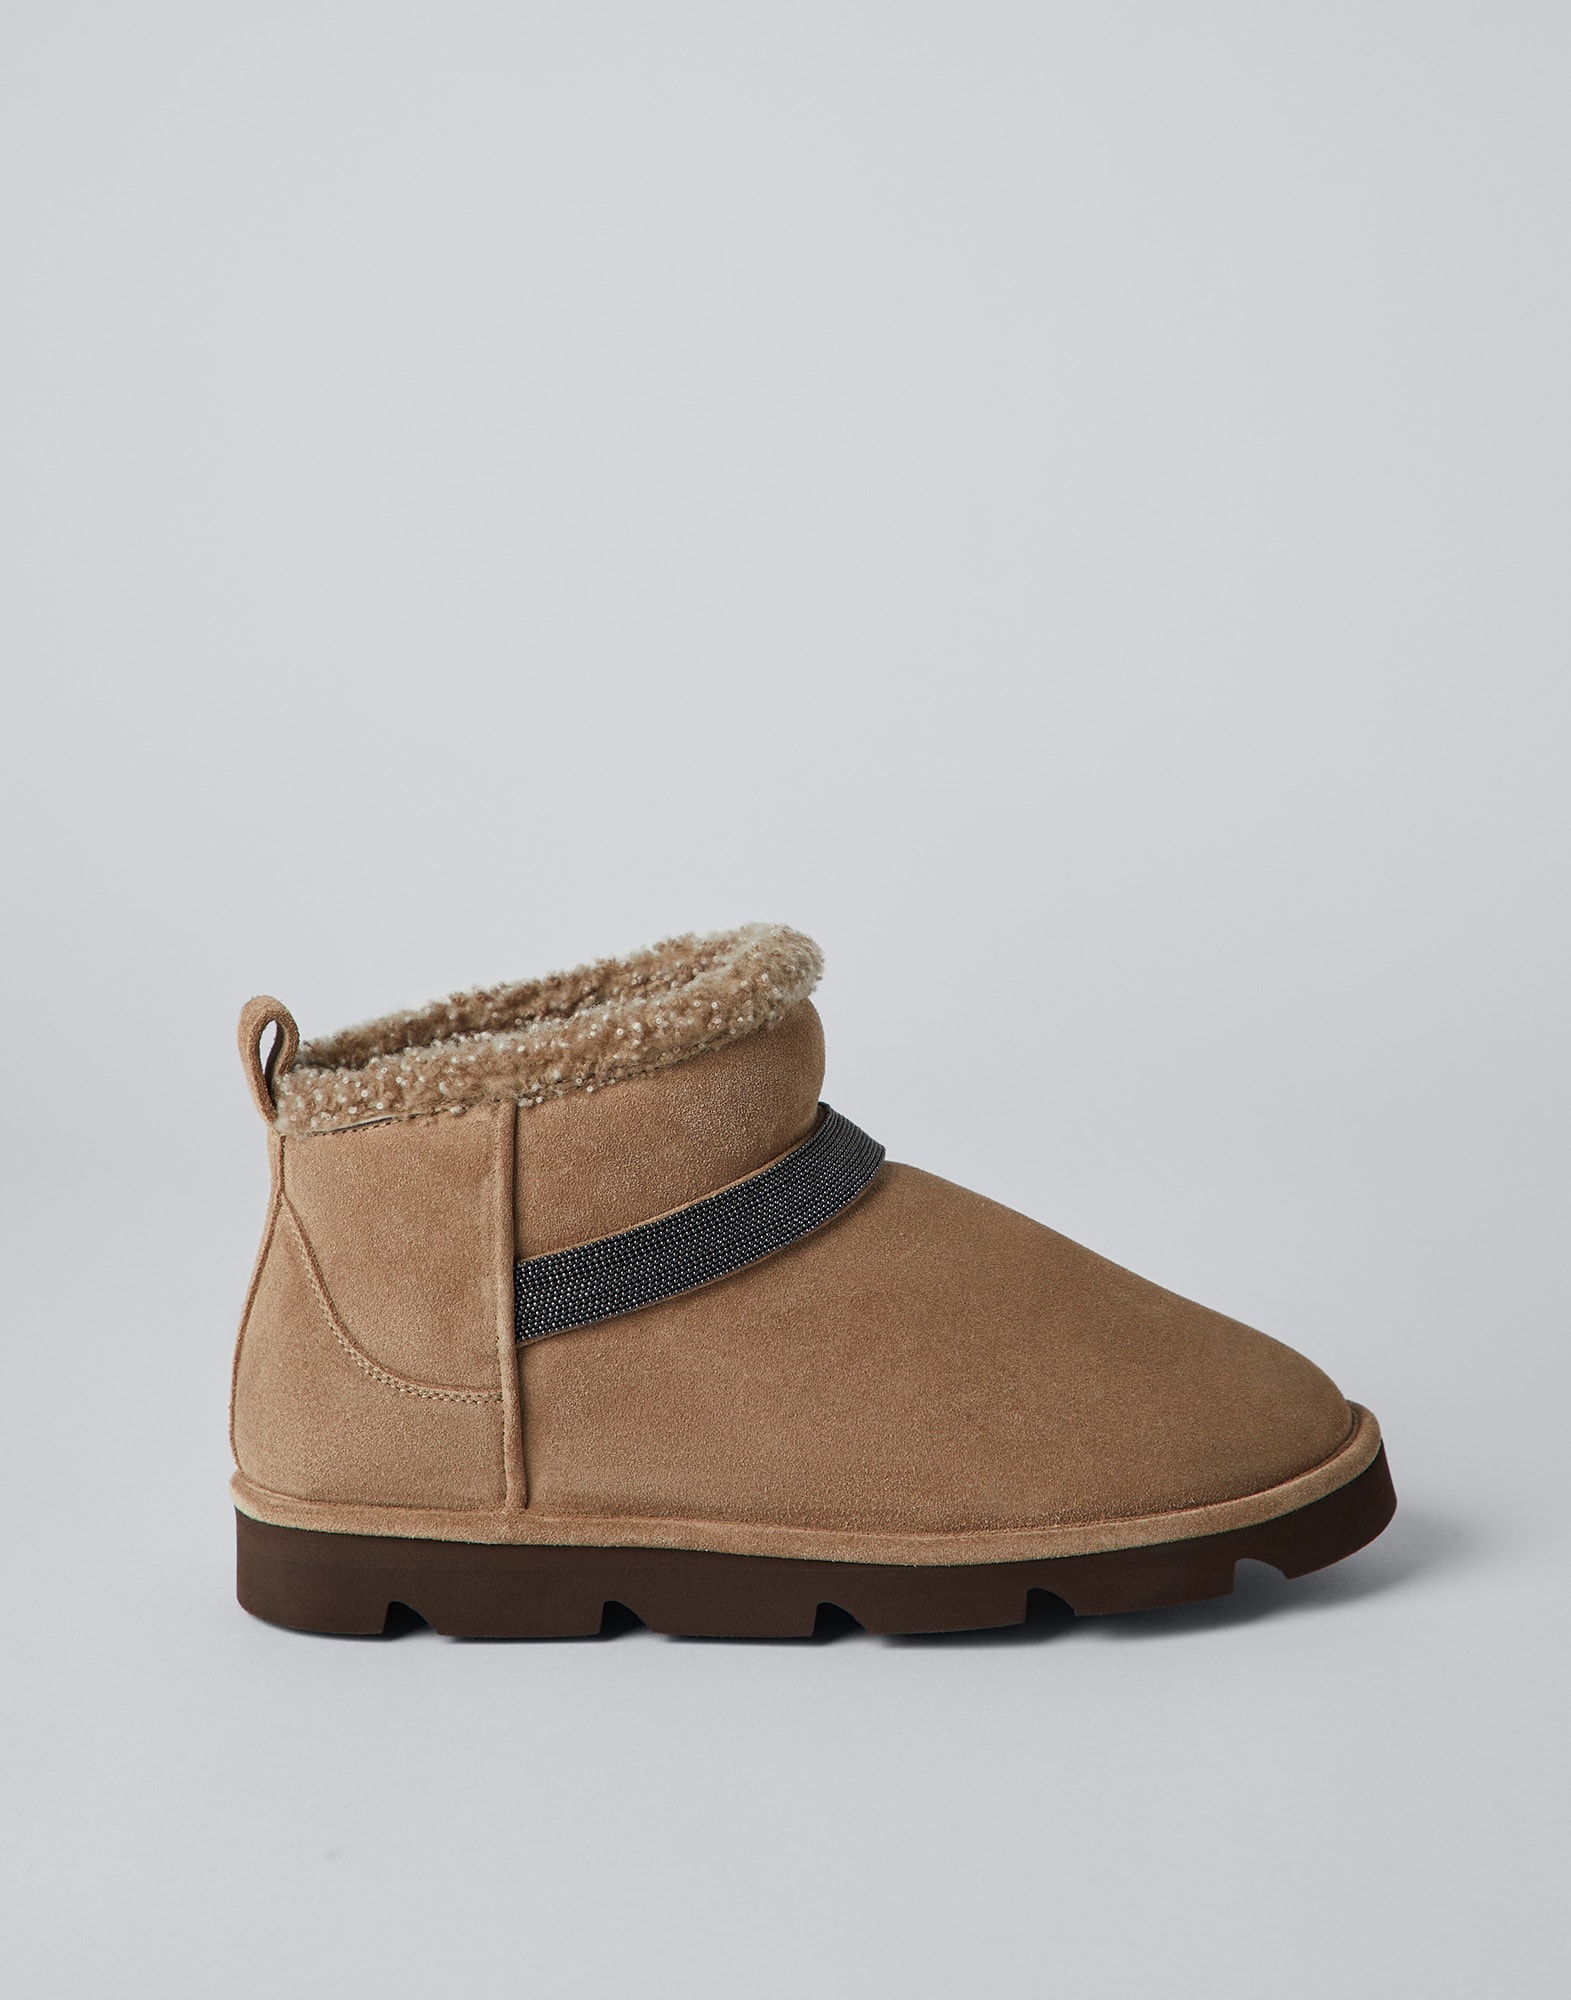 Suede boots with shearling lining and shiny band - 5